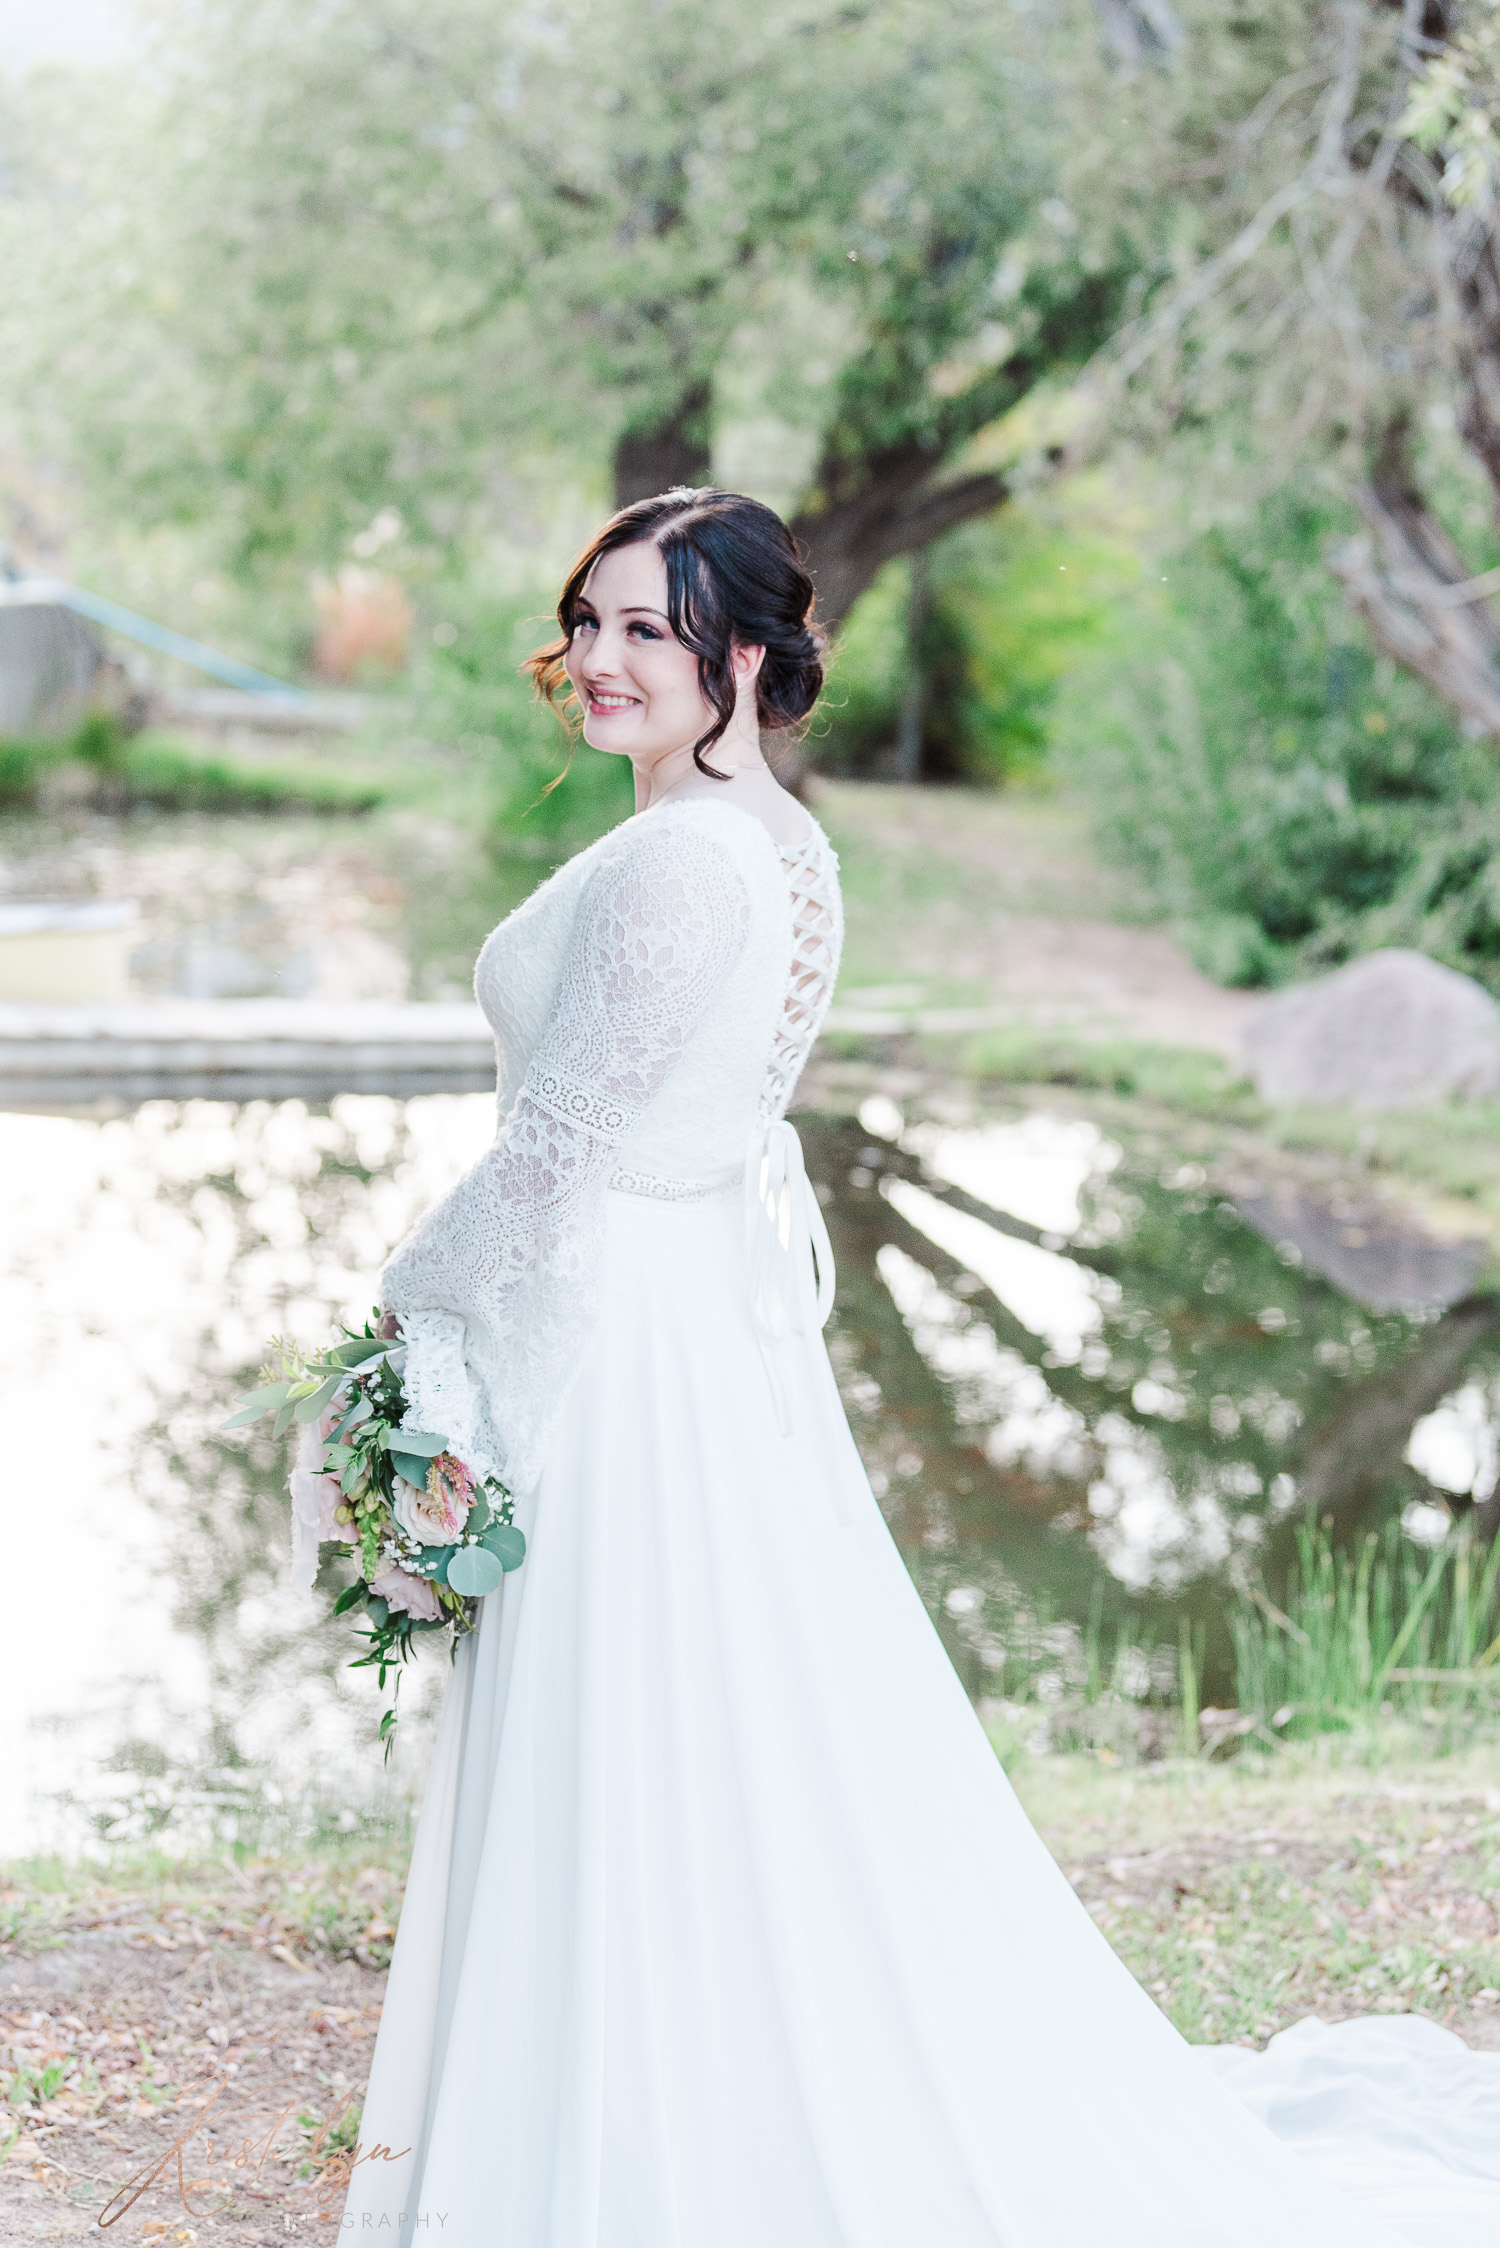 Sunset wedding at New Harmony Utah. Bride in wedding attire standing near a willow pond.